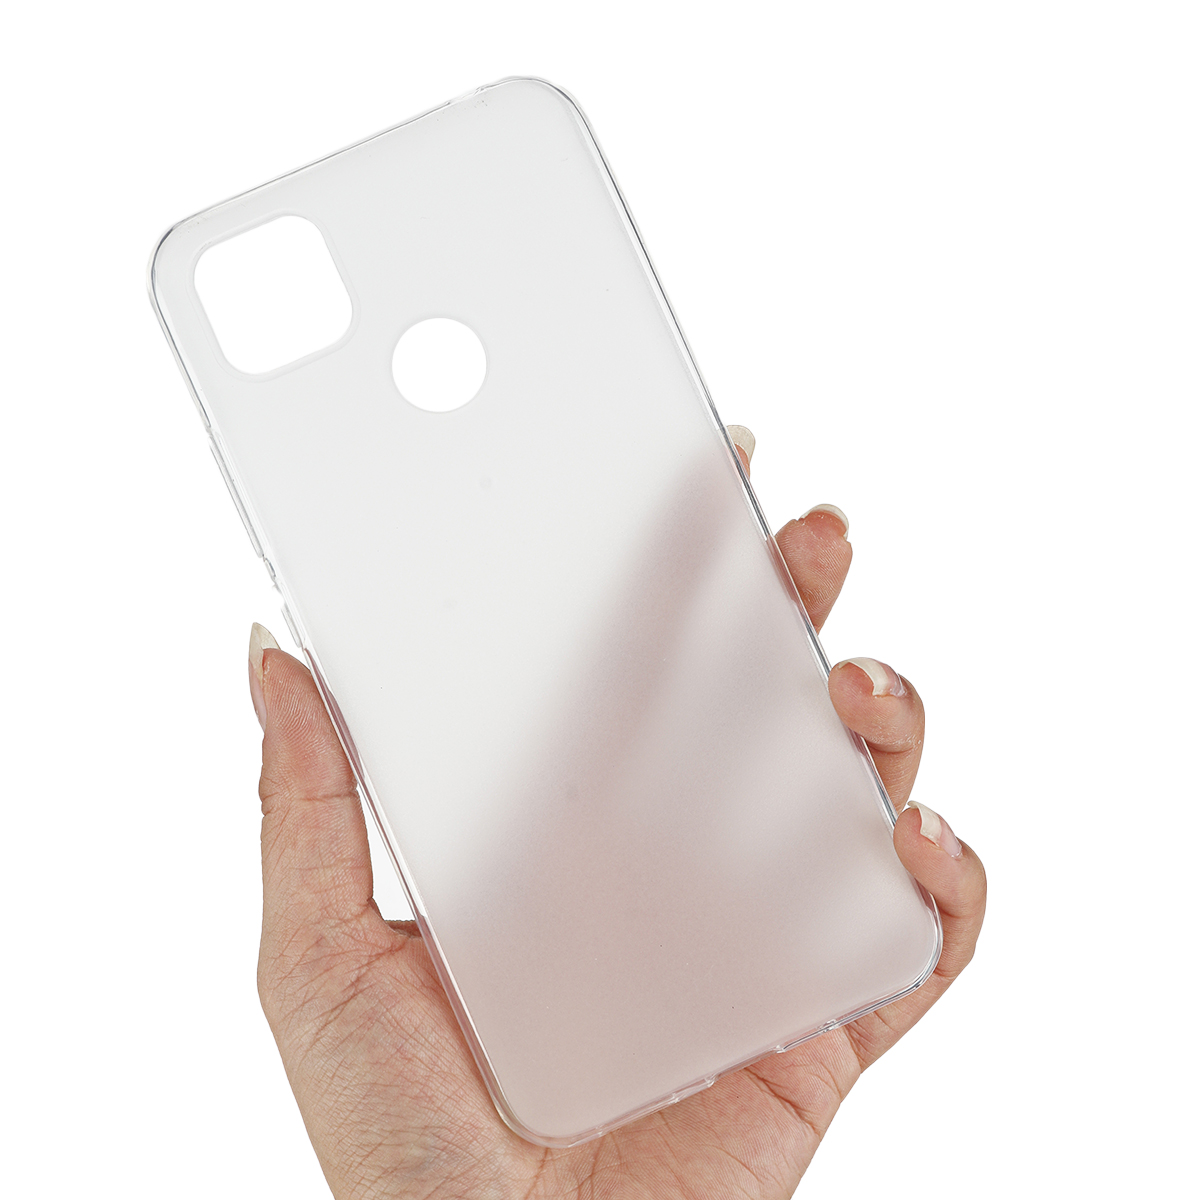 Bakeey-Pudding-Series-Frosted-Shockproof-Ultra-Thin-Non-Yellow-Anti-Fingerprint-Soft-TPU-Protective--1735438-11